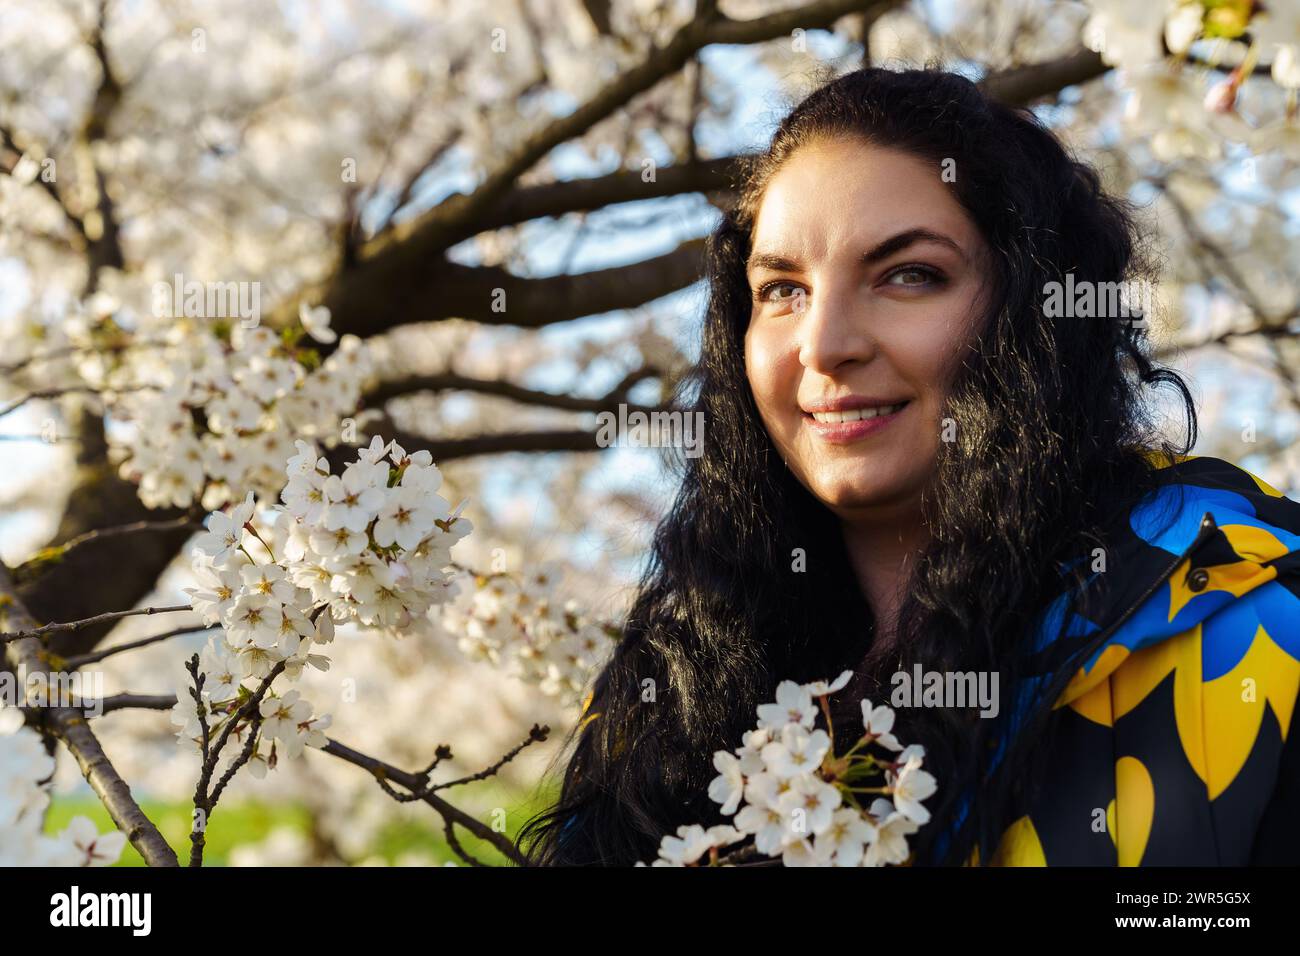 Attractive young brunette woman with long hair smiling in spring in blooming cherry blossom garden Stock Photo